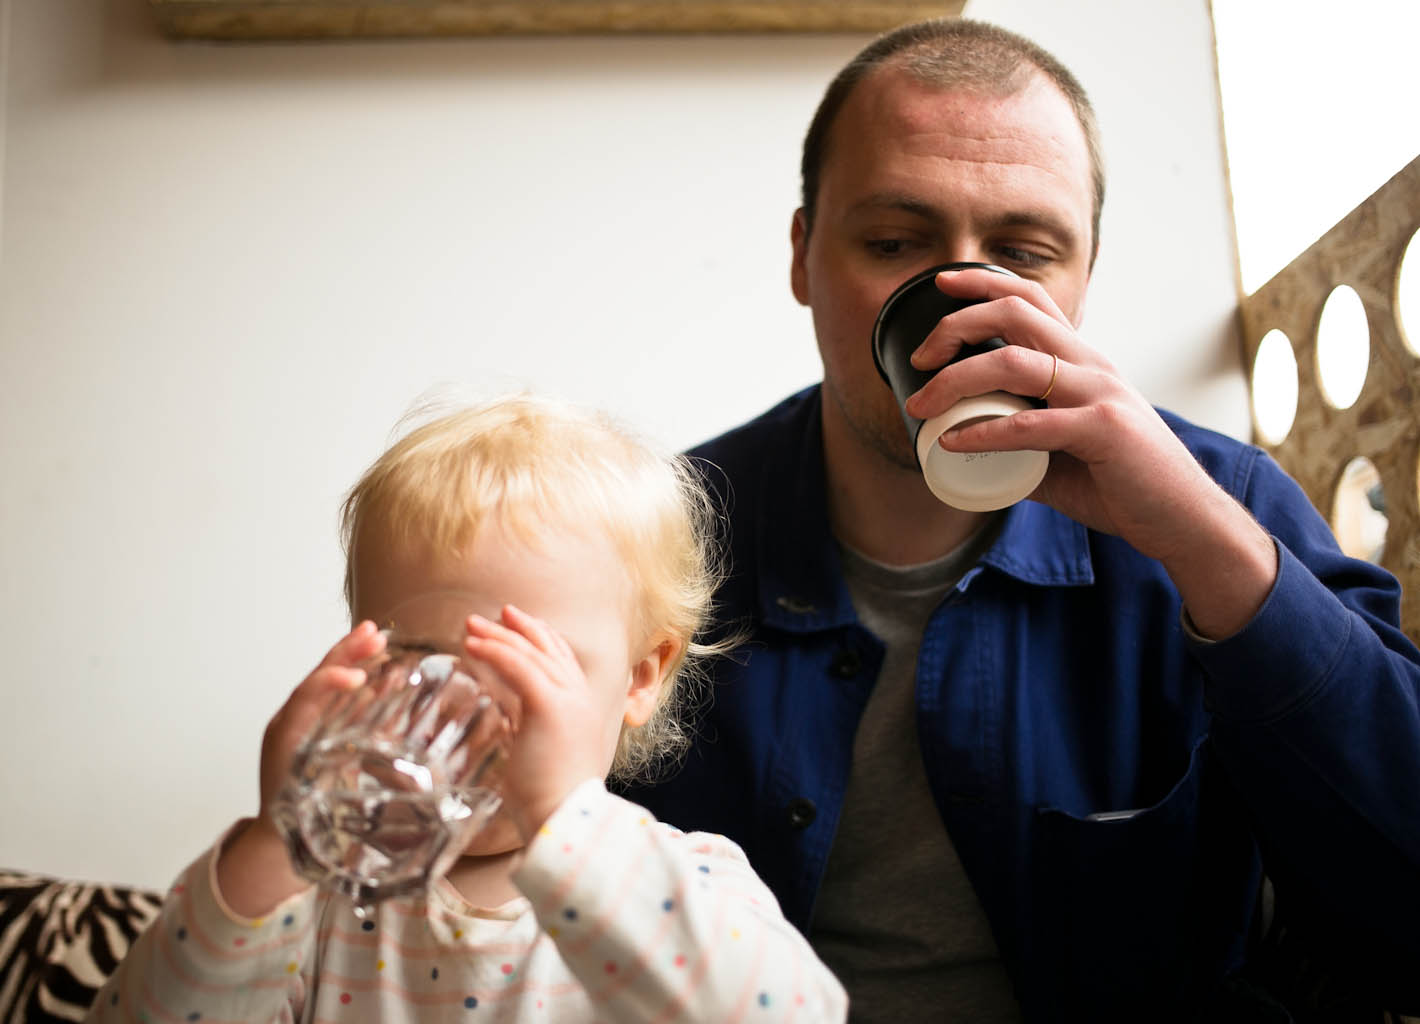 Father drinking takeaway coffee watching young daughter drink a glass of water